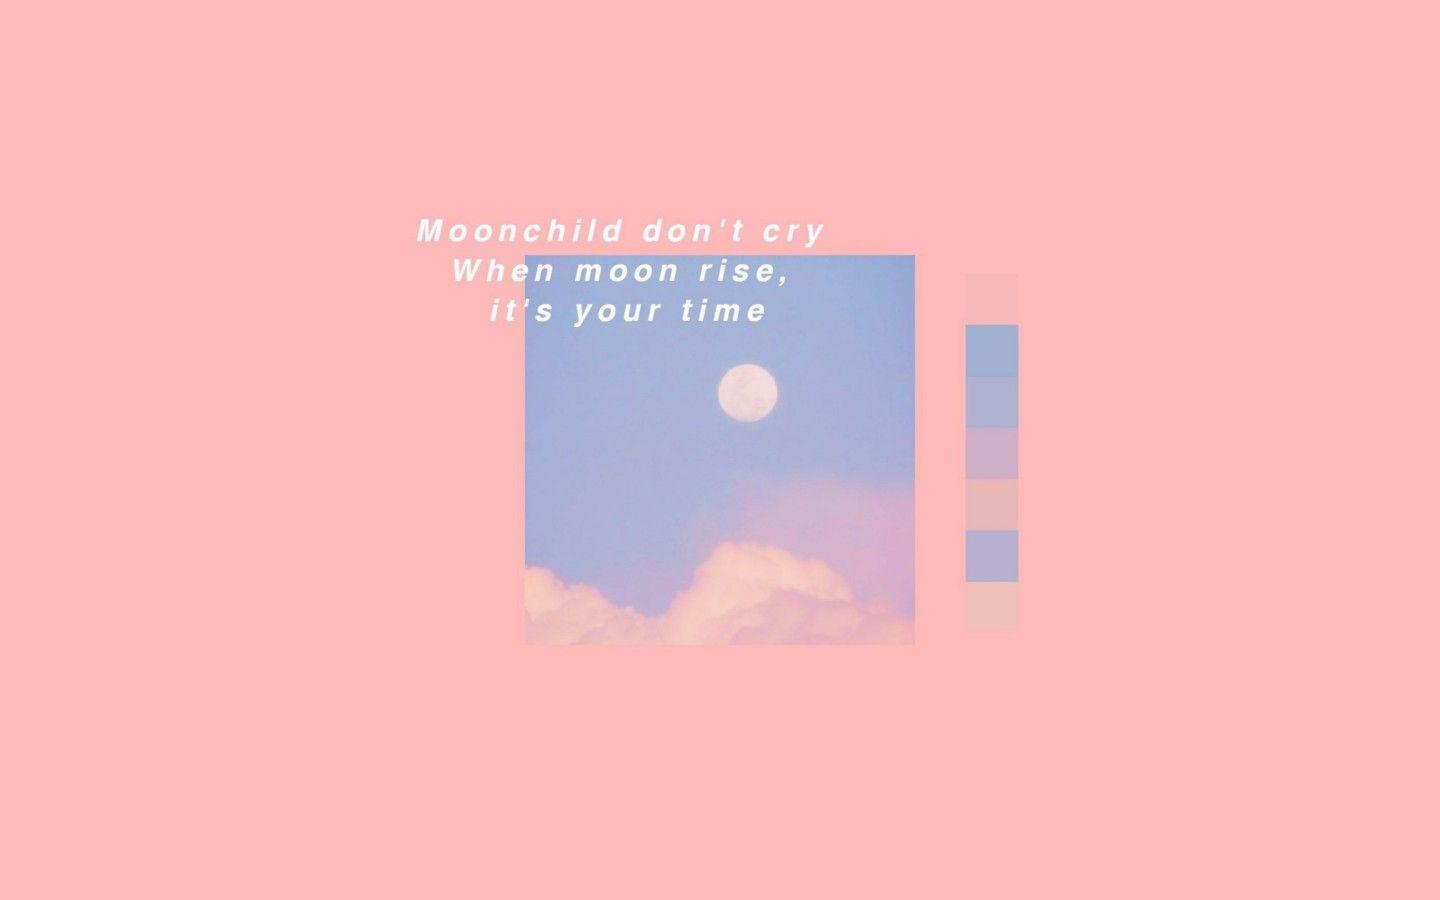 moonchild, don't cry when it's your time you'll shine